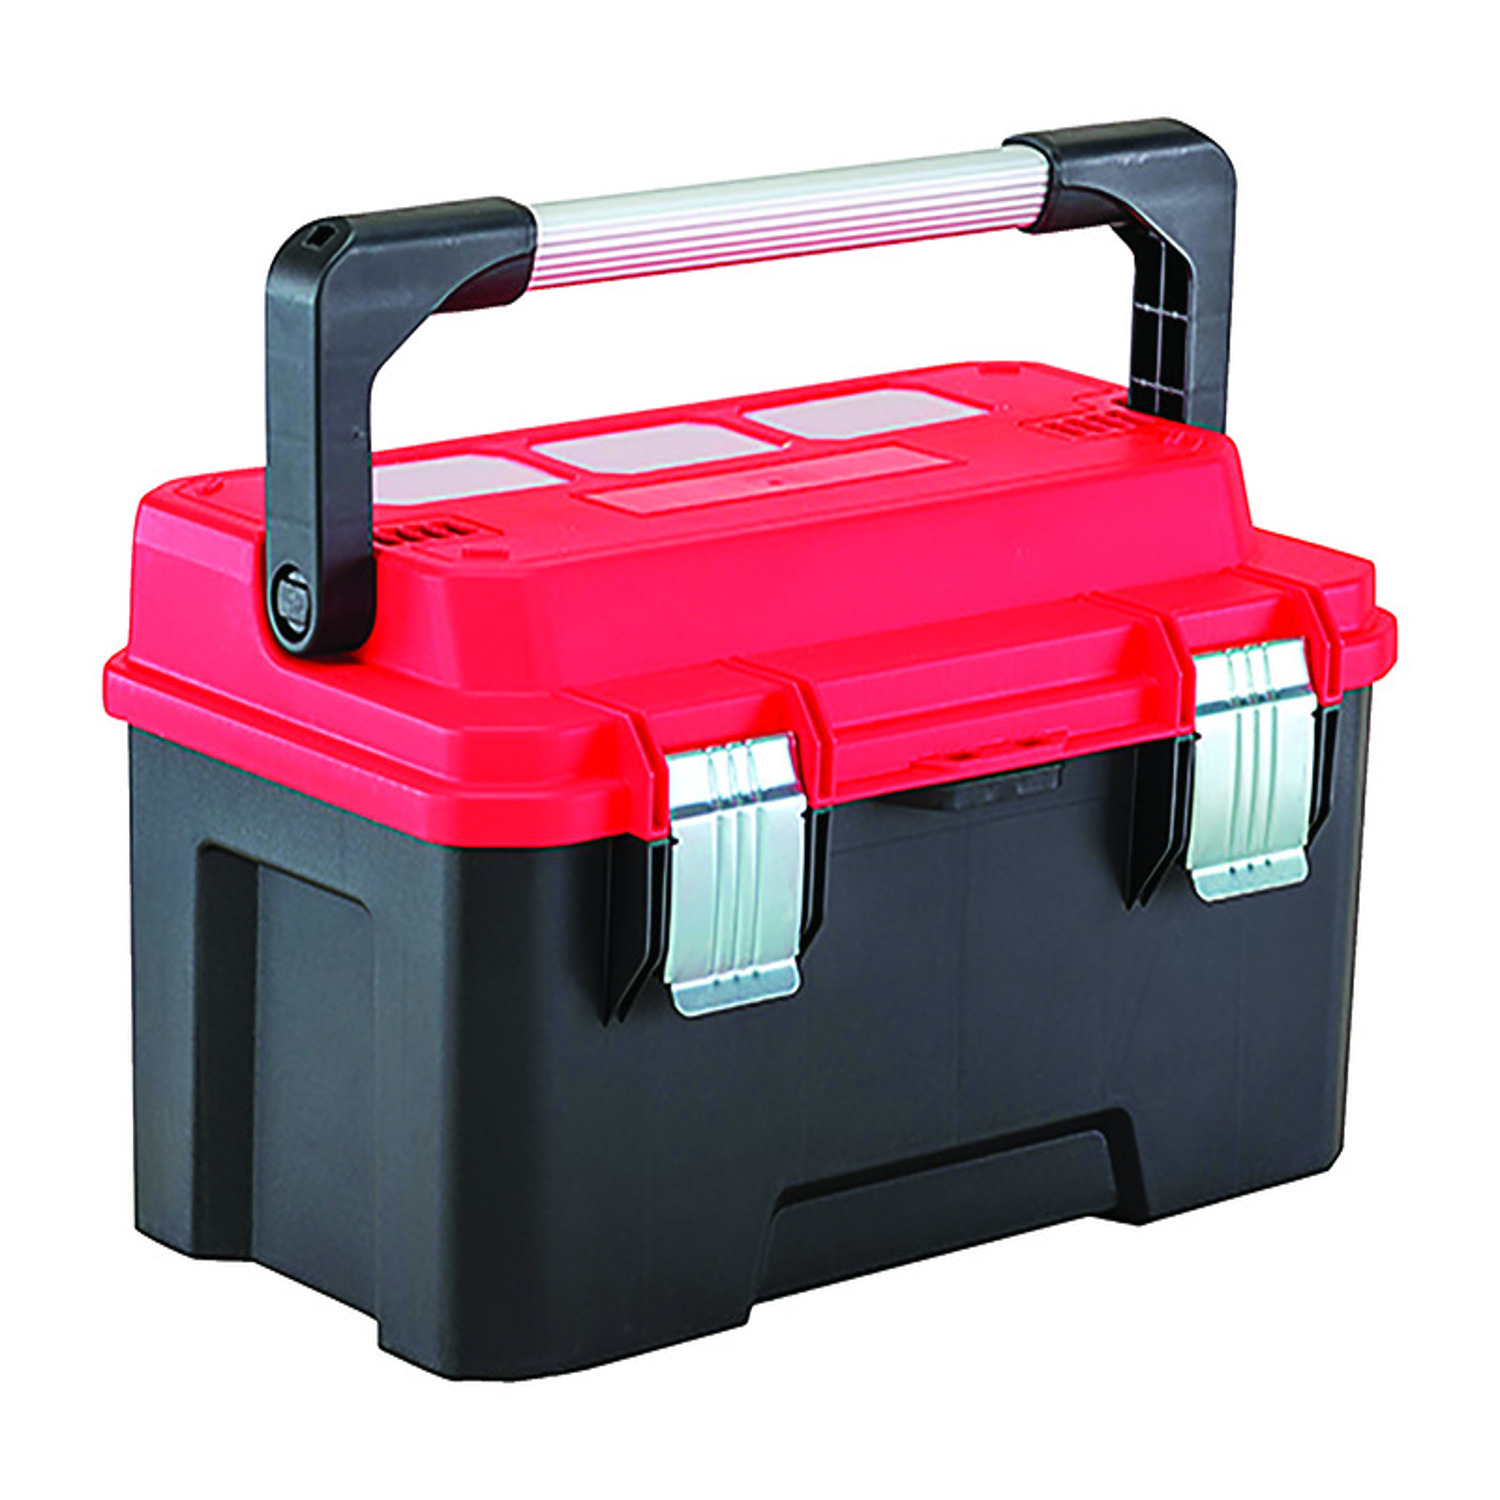 Craftsman Pro 20 in. Cantilever Tool Box 1257 cu in Black/Red -  CMST20320L